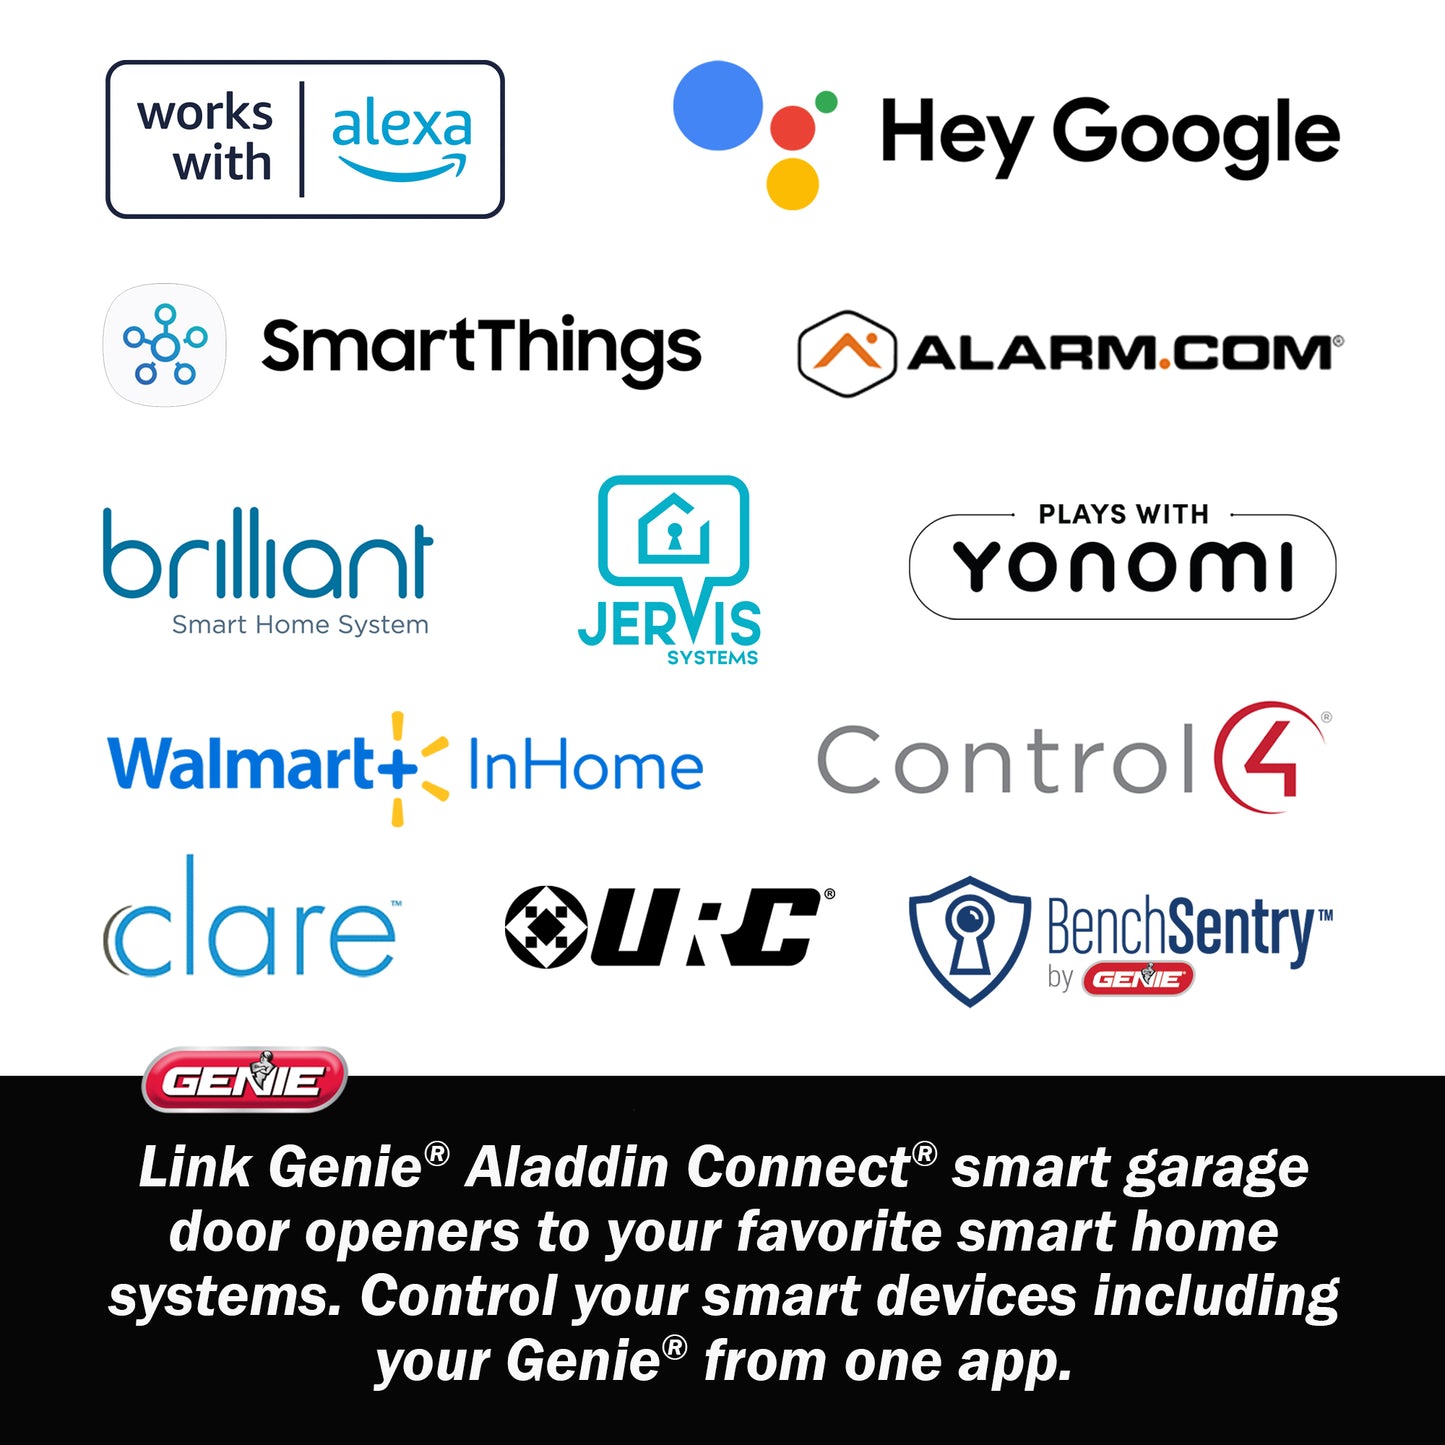 Link Genie Aladdin Connect smart garage door openers to other smart home systems_Amazon Alexa_Hey Google_Smart Things and more